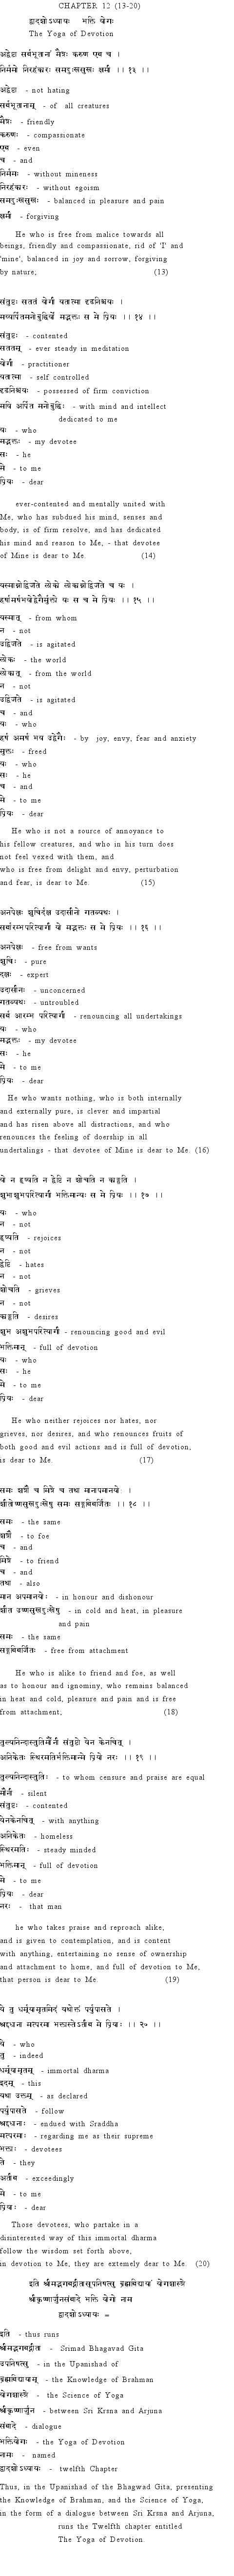 Text of Ch.12_2